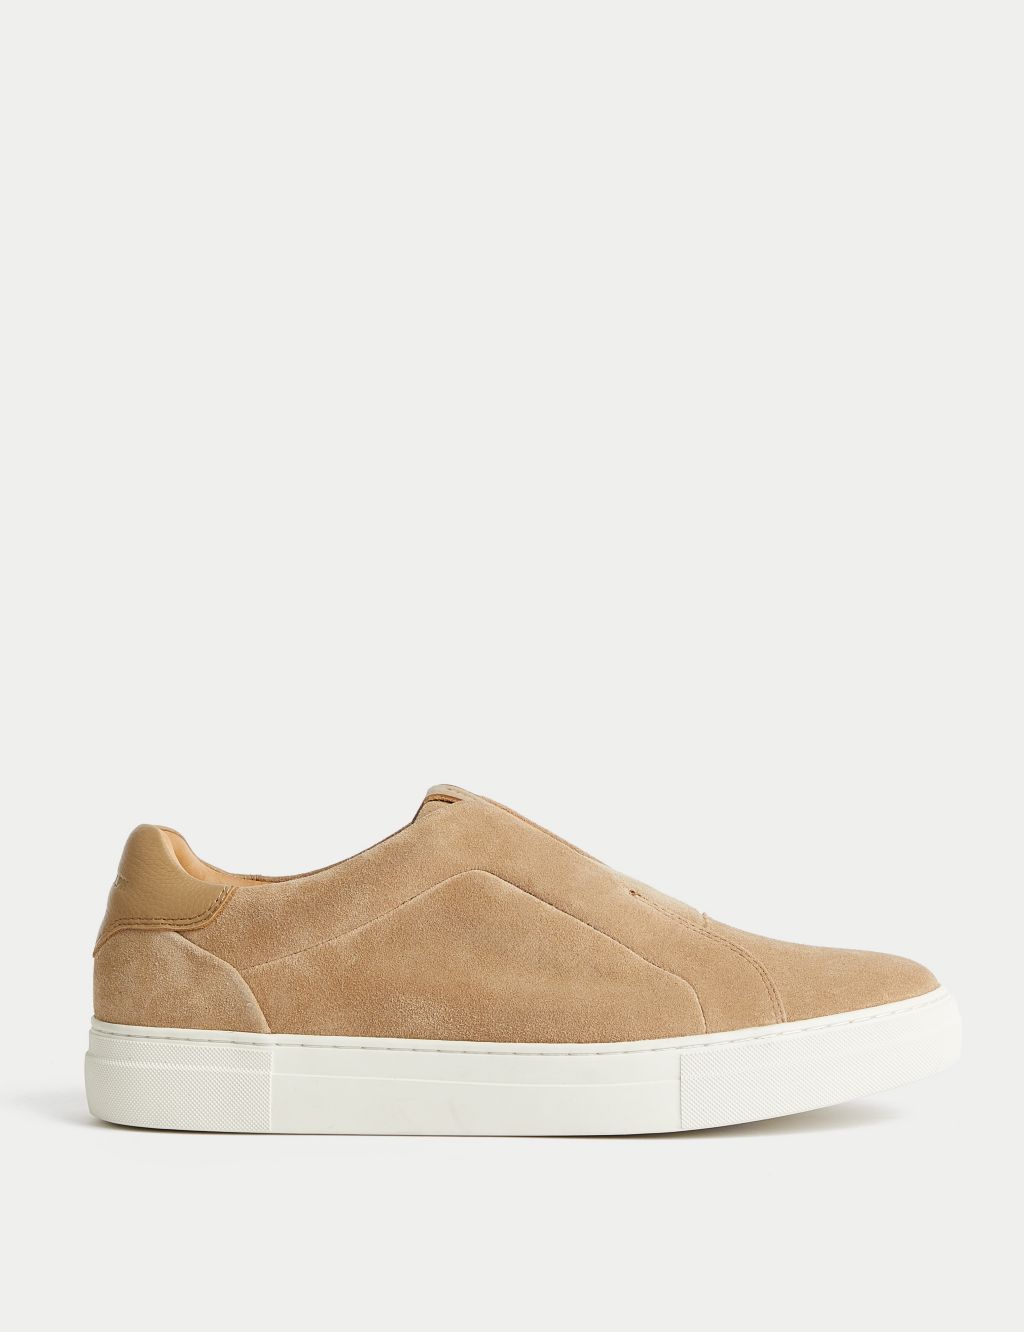 Suede Slip On Suede Trainers with Freshfeet™